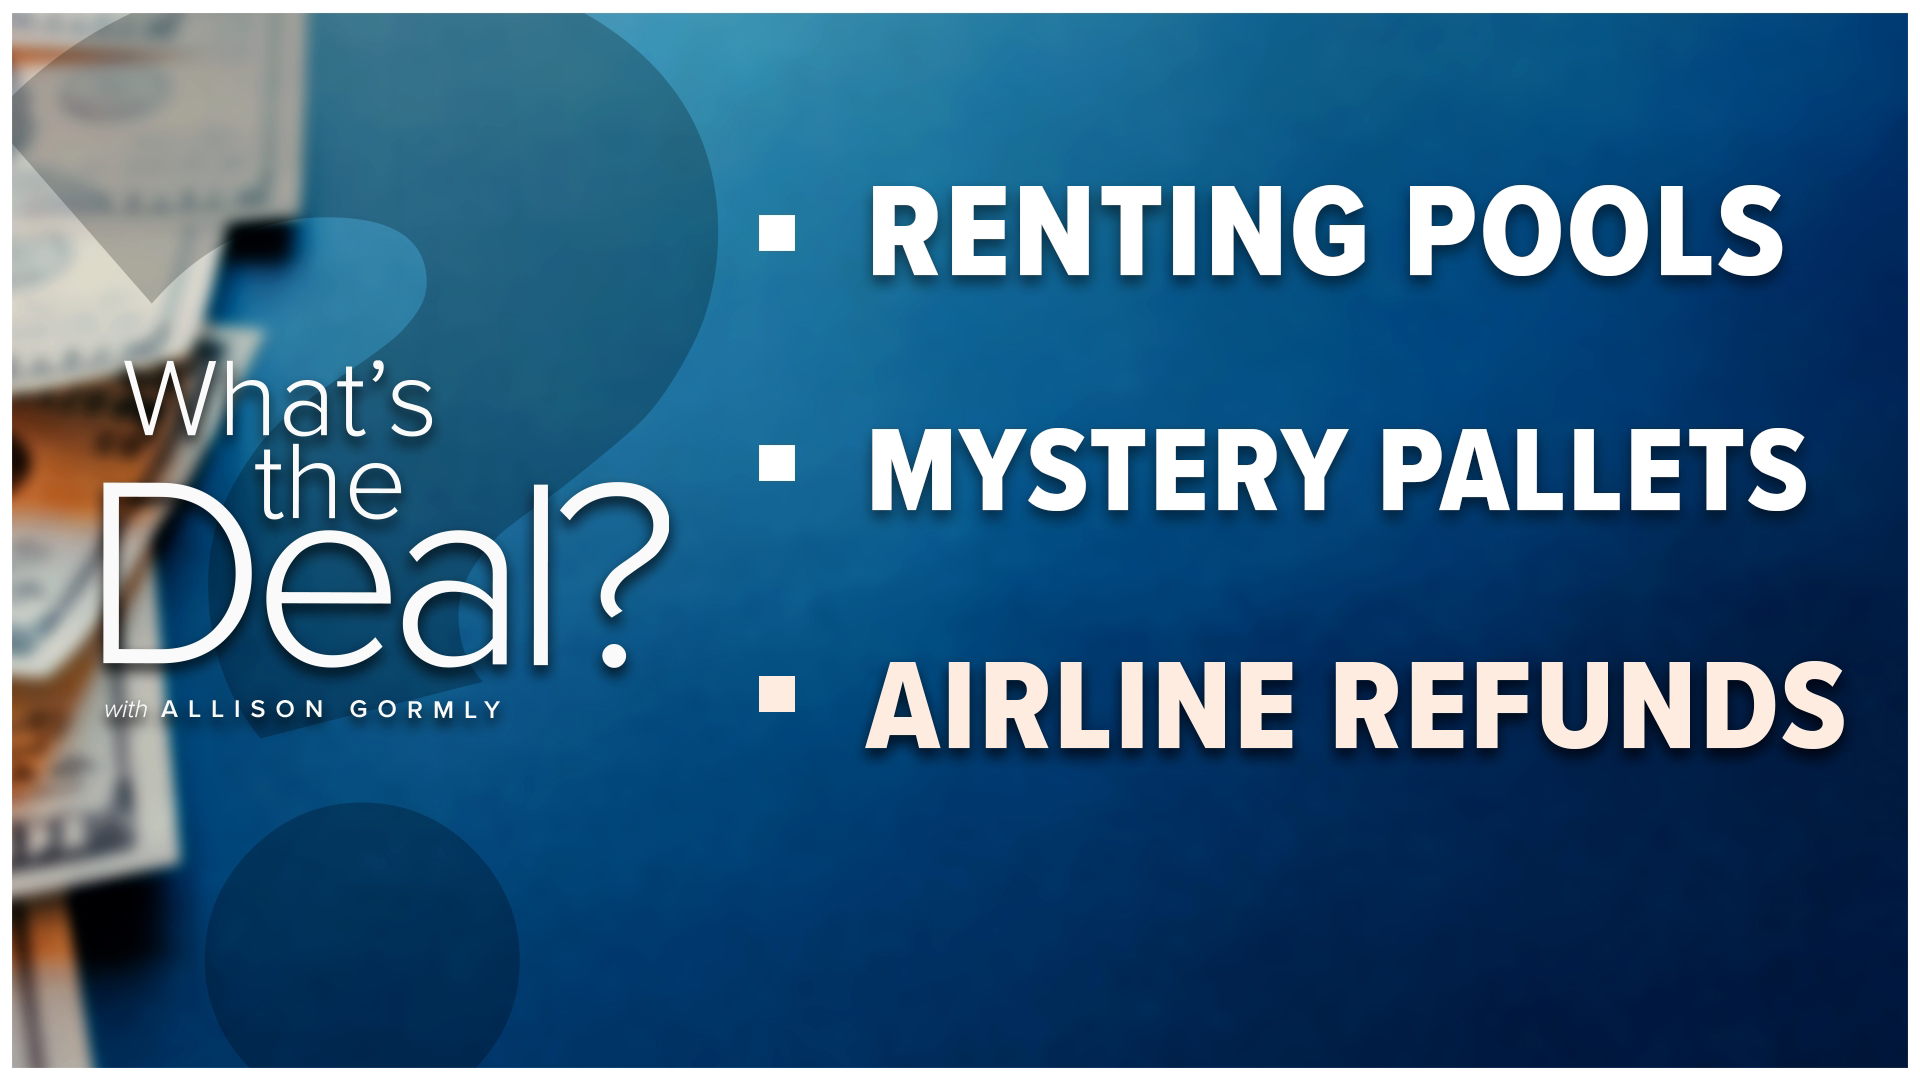 We look into what's the deal with renting pools, mystery pallets and if they are worth the money, airline refunds and more.